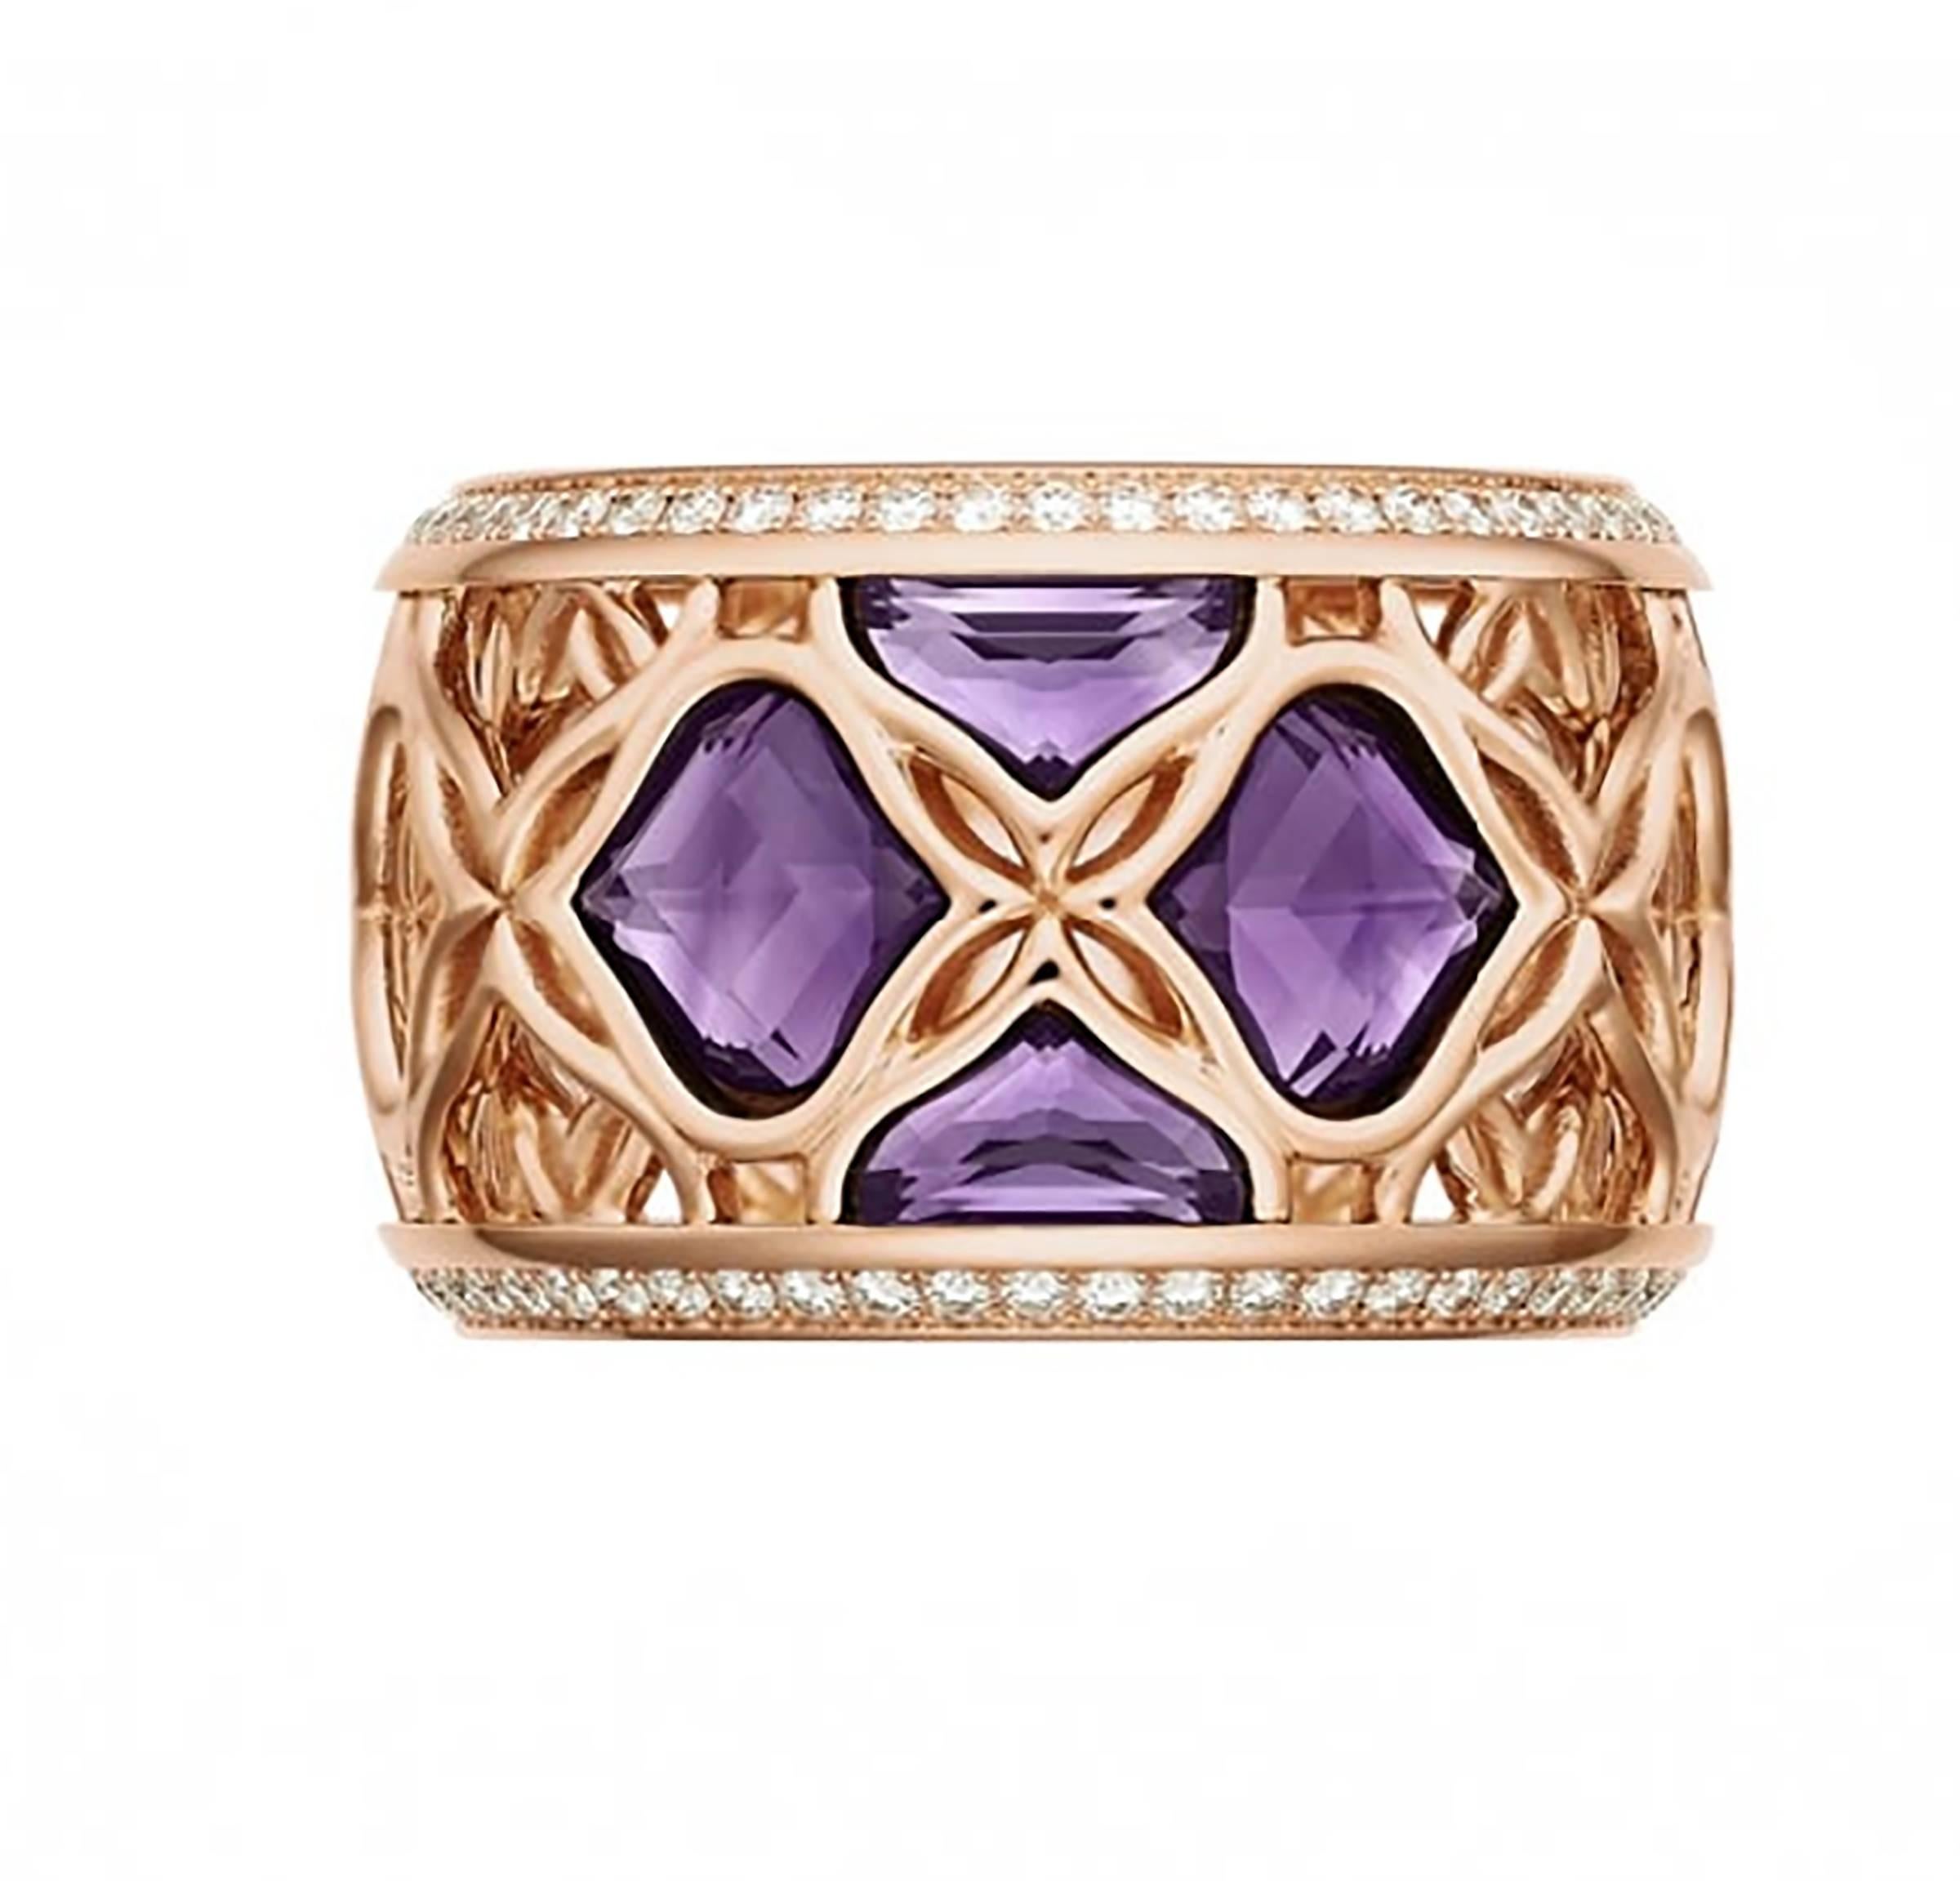 With its intricate filigree work and elegant quartet of fancy-cut amethysts, this IMPERIALE ring in 18-carat rose gold is the quintessence of style and sophistication. Like finely woven lace, the sinuous lines of its motif are inspired by ancient